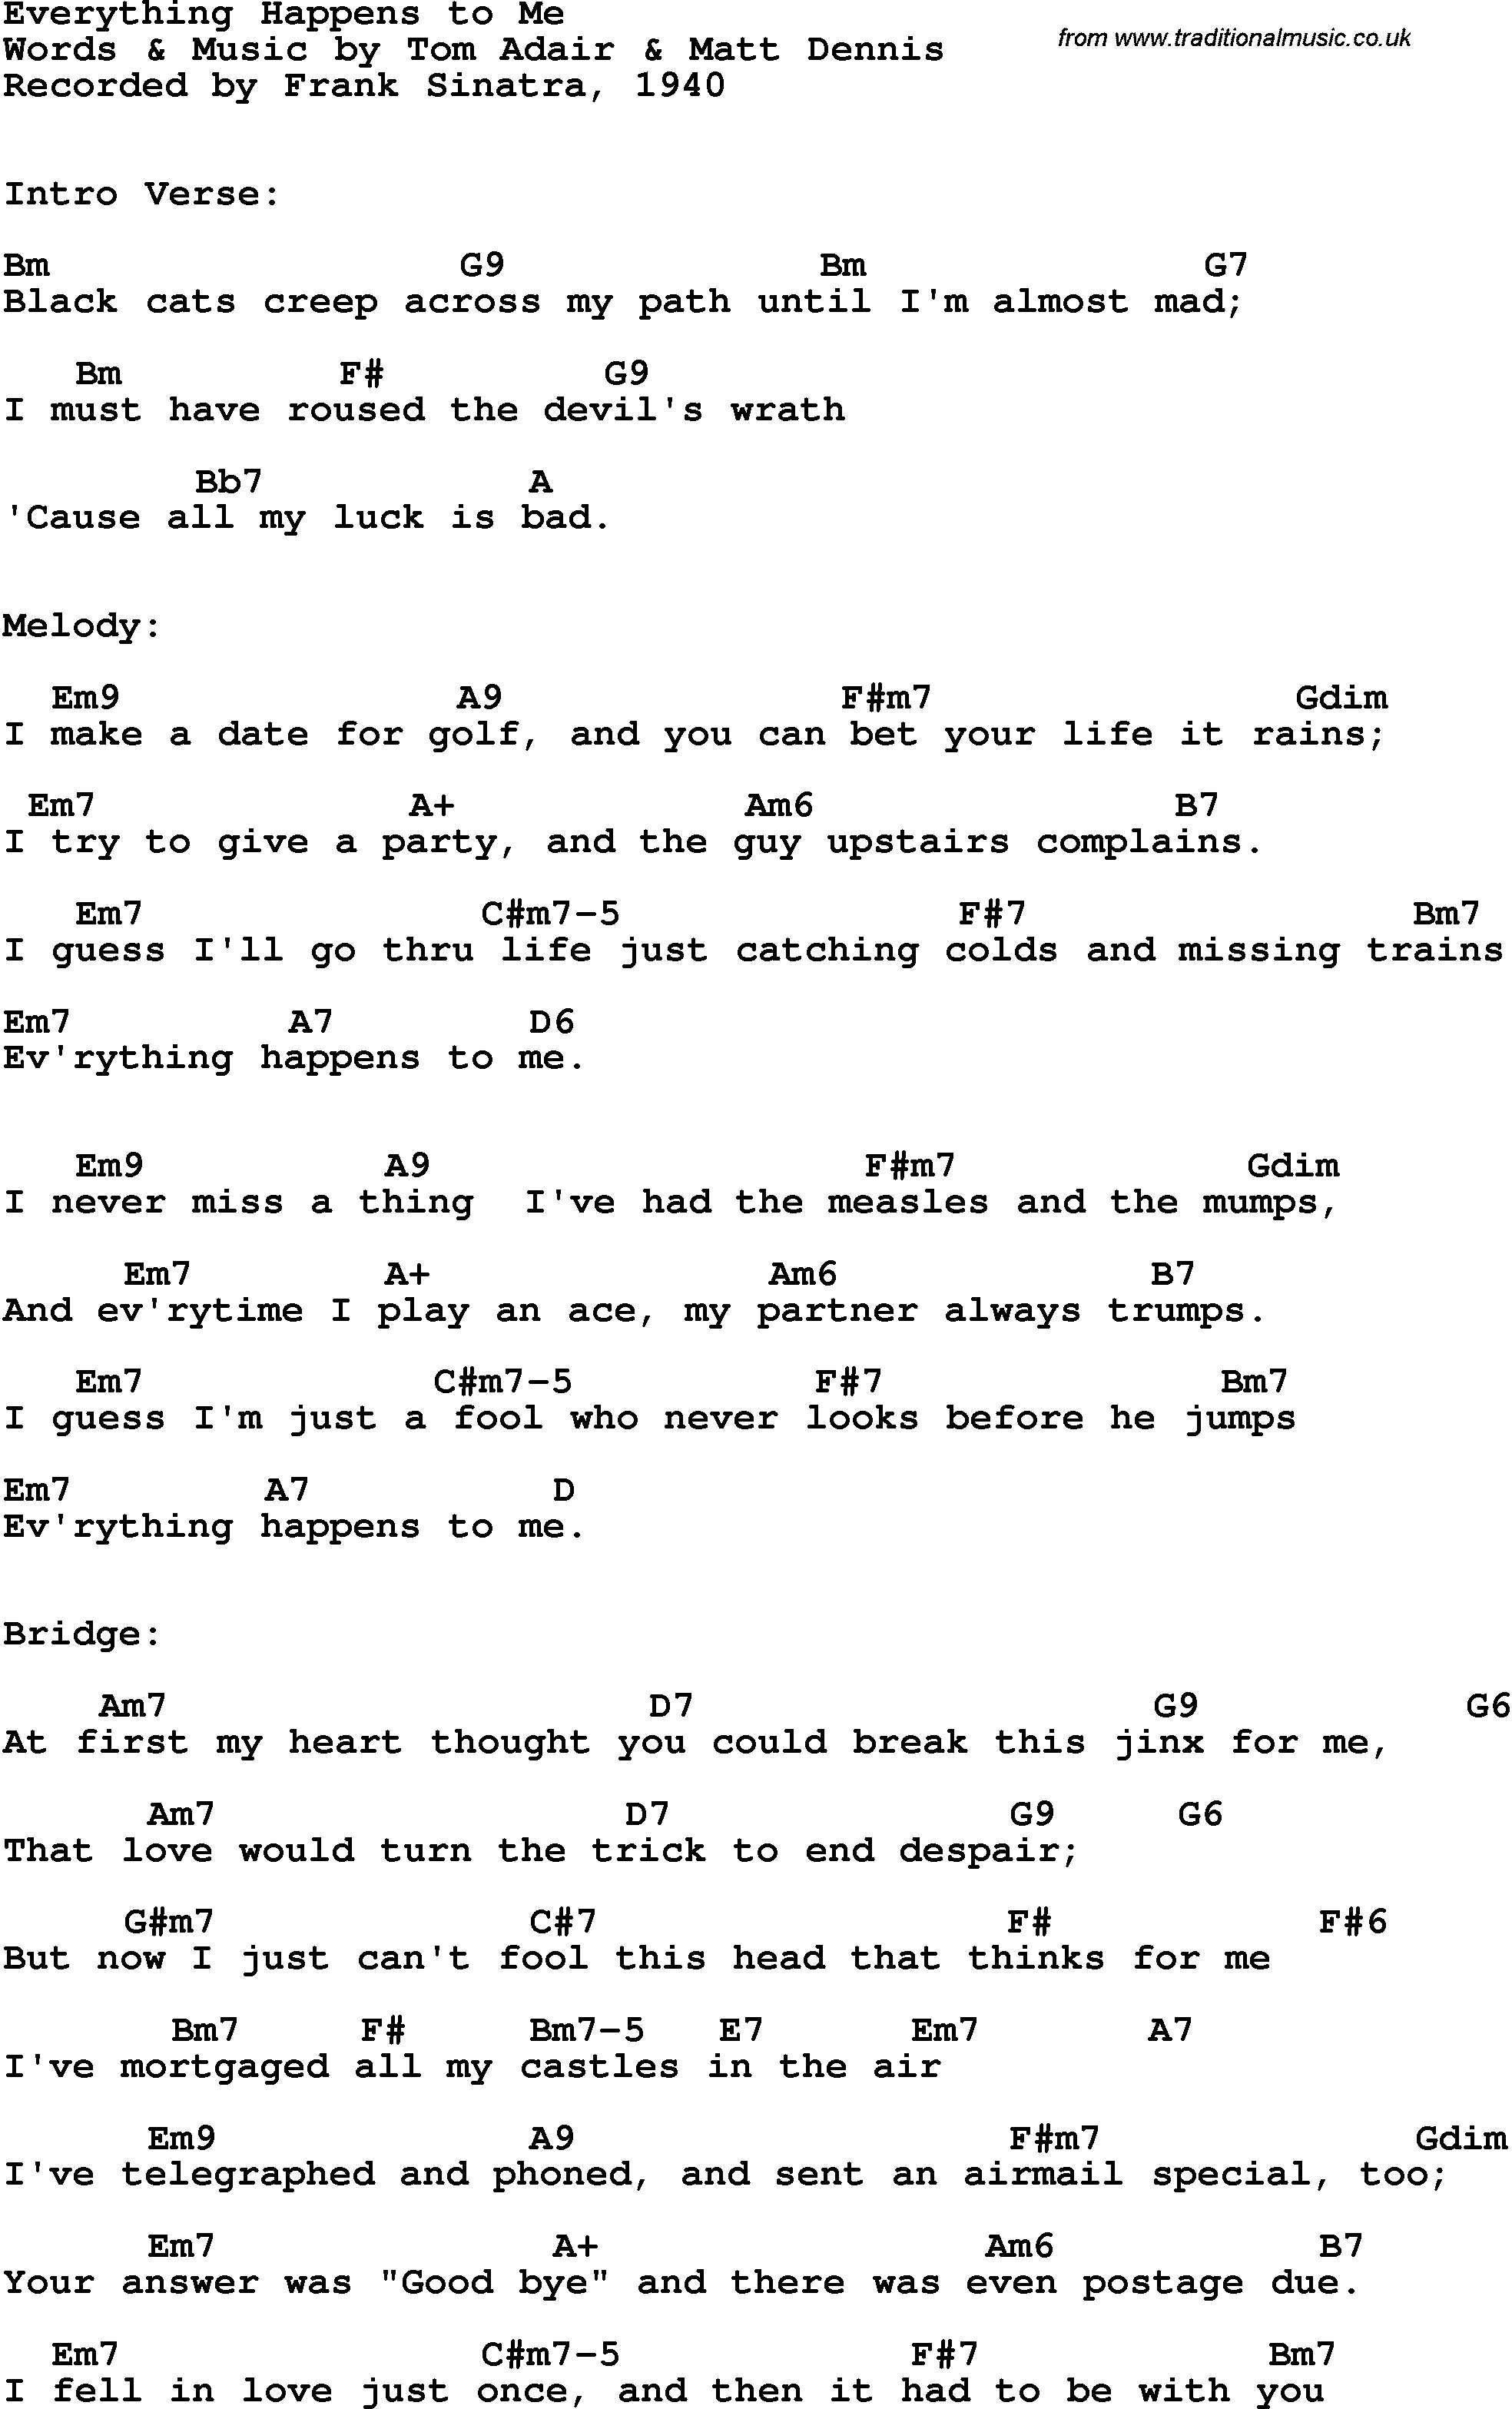 Song Lyrics with guitar chords for Everything Happens To Me - Frank Sinatra, 1940